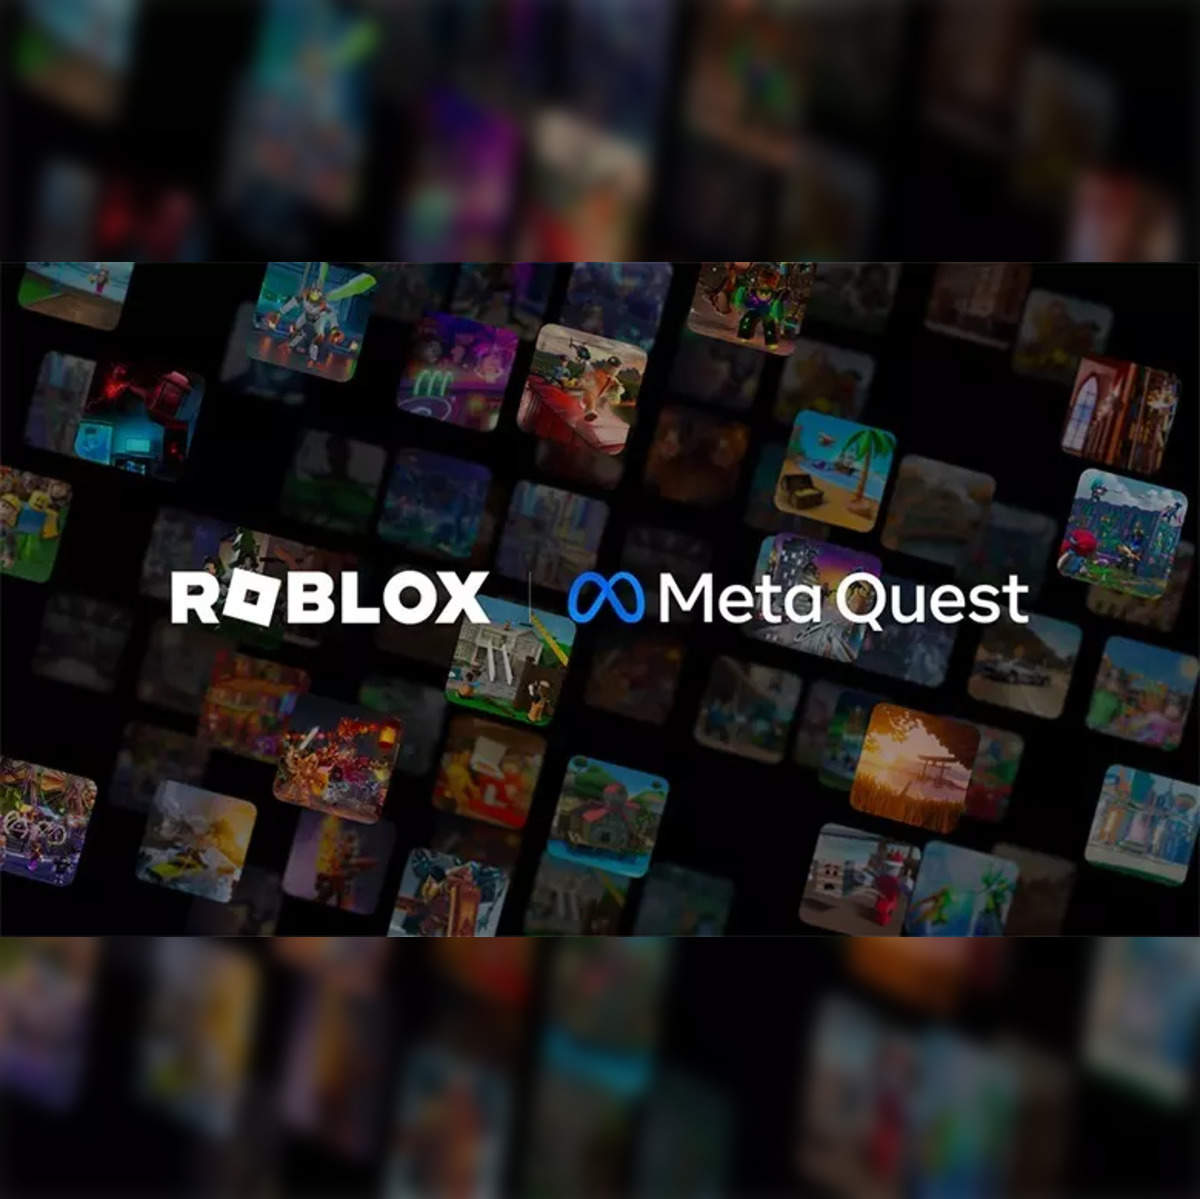 Roblox teams up with Disney to advance kids' coding skills with